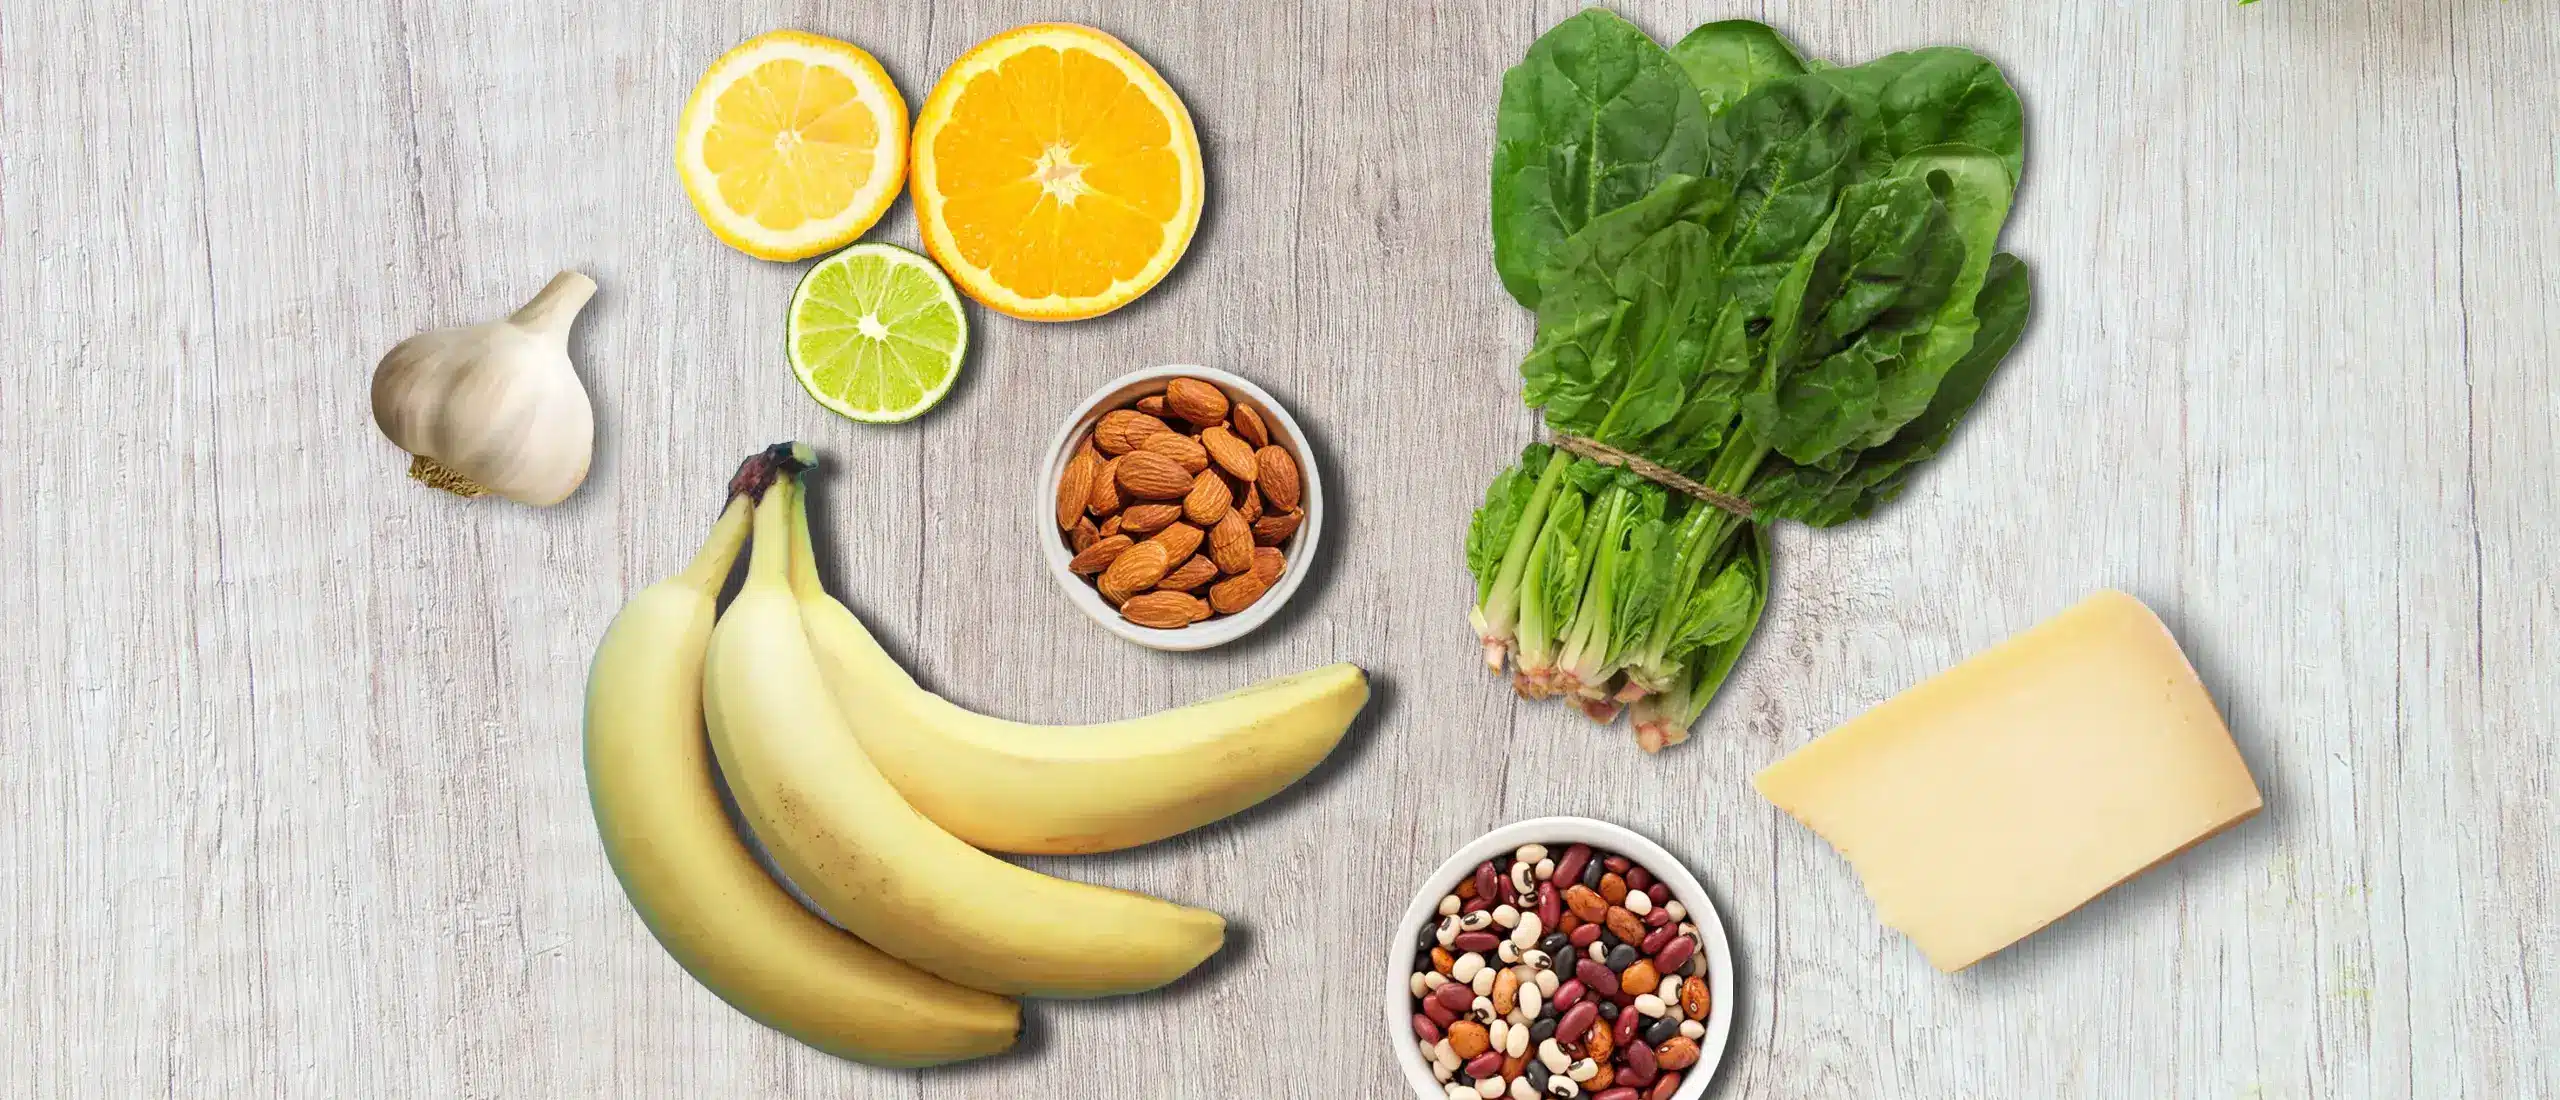 Butyrate foods—citrus, bananas, almonds, beans, lettuce, and hard cheese—displayed on a wood board.